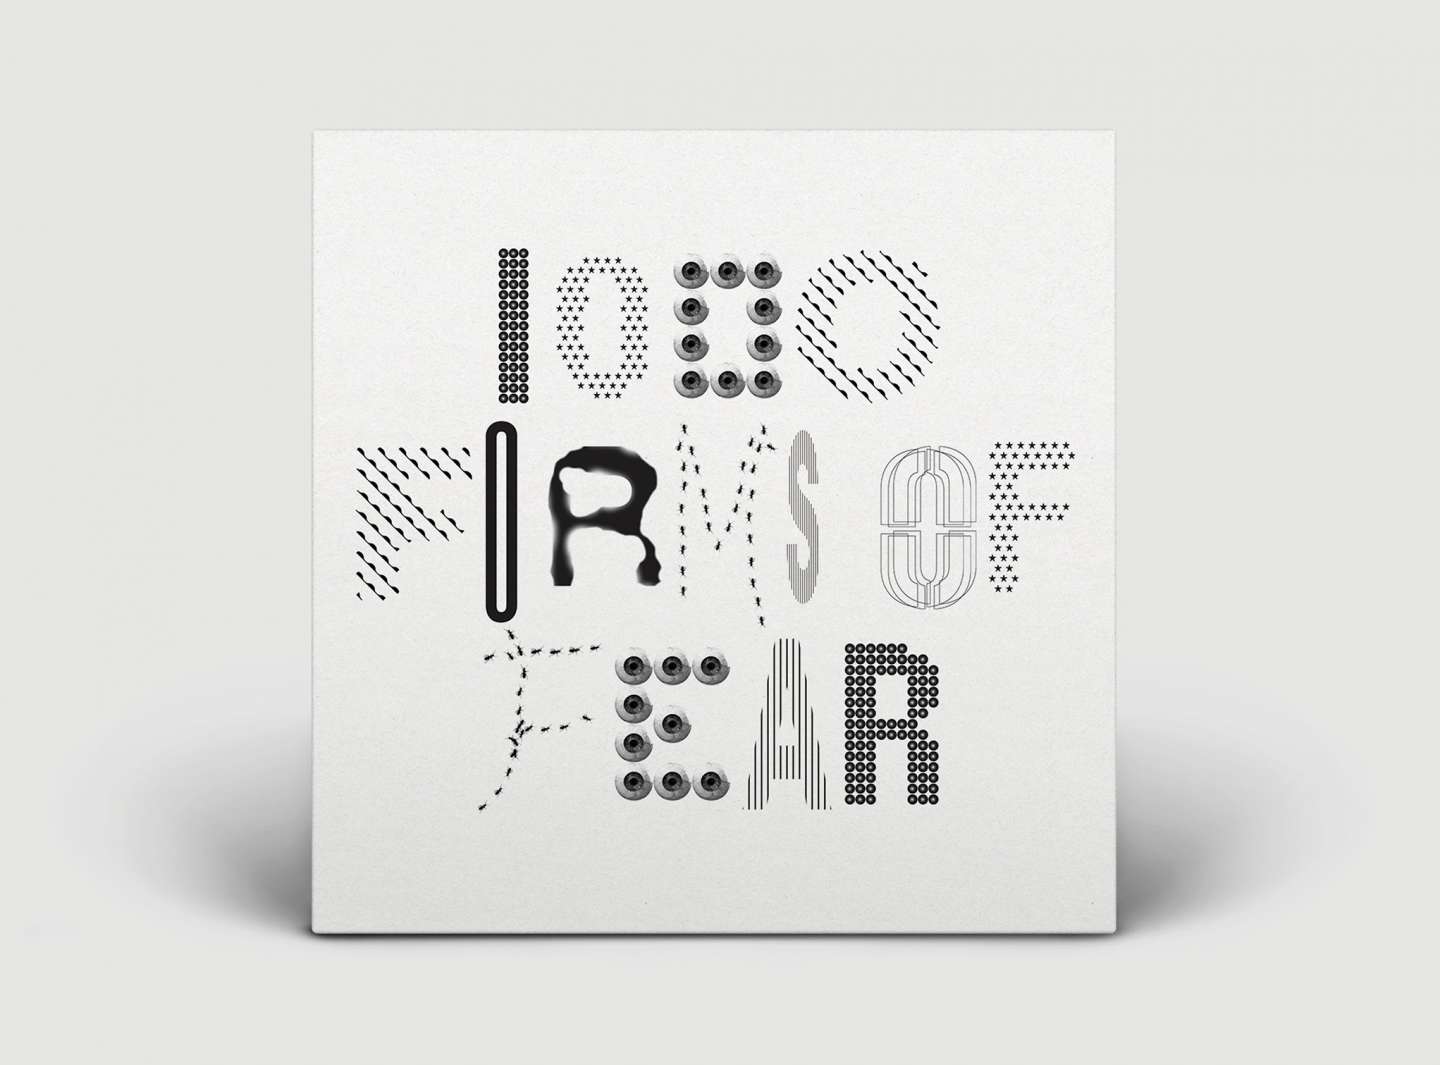 1000 Forms of Fear Album